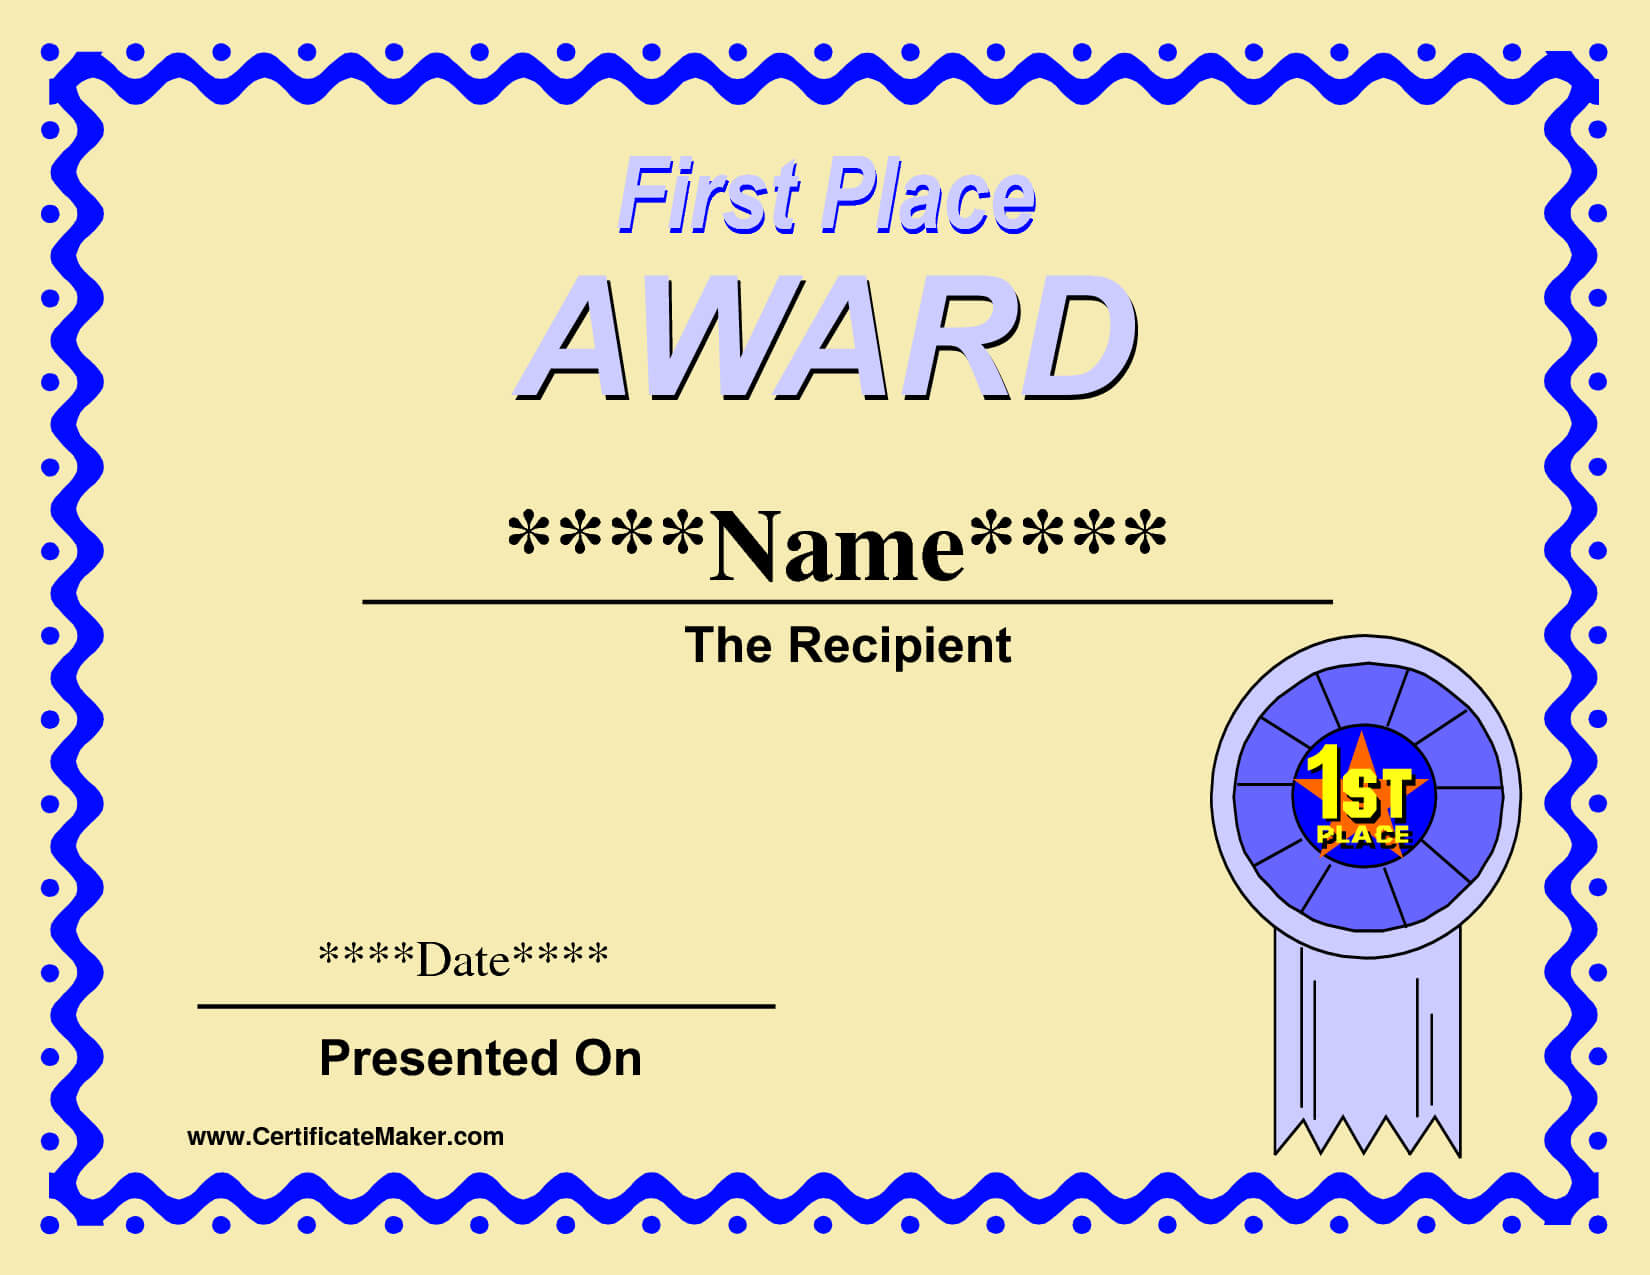 23st place certificate template - Besko For First Place Award Certificate Template